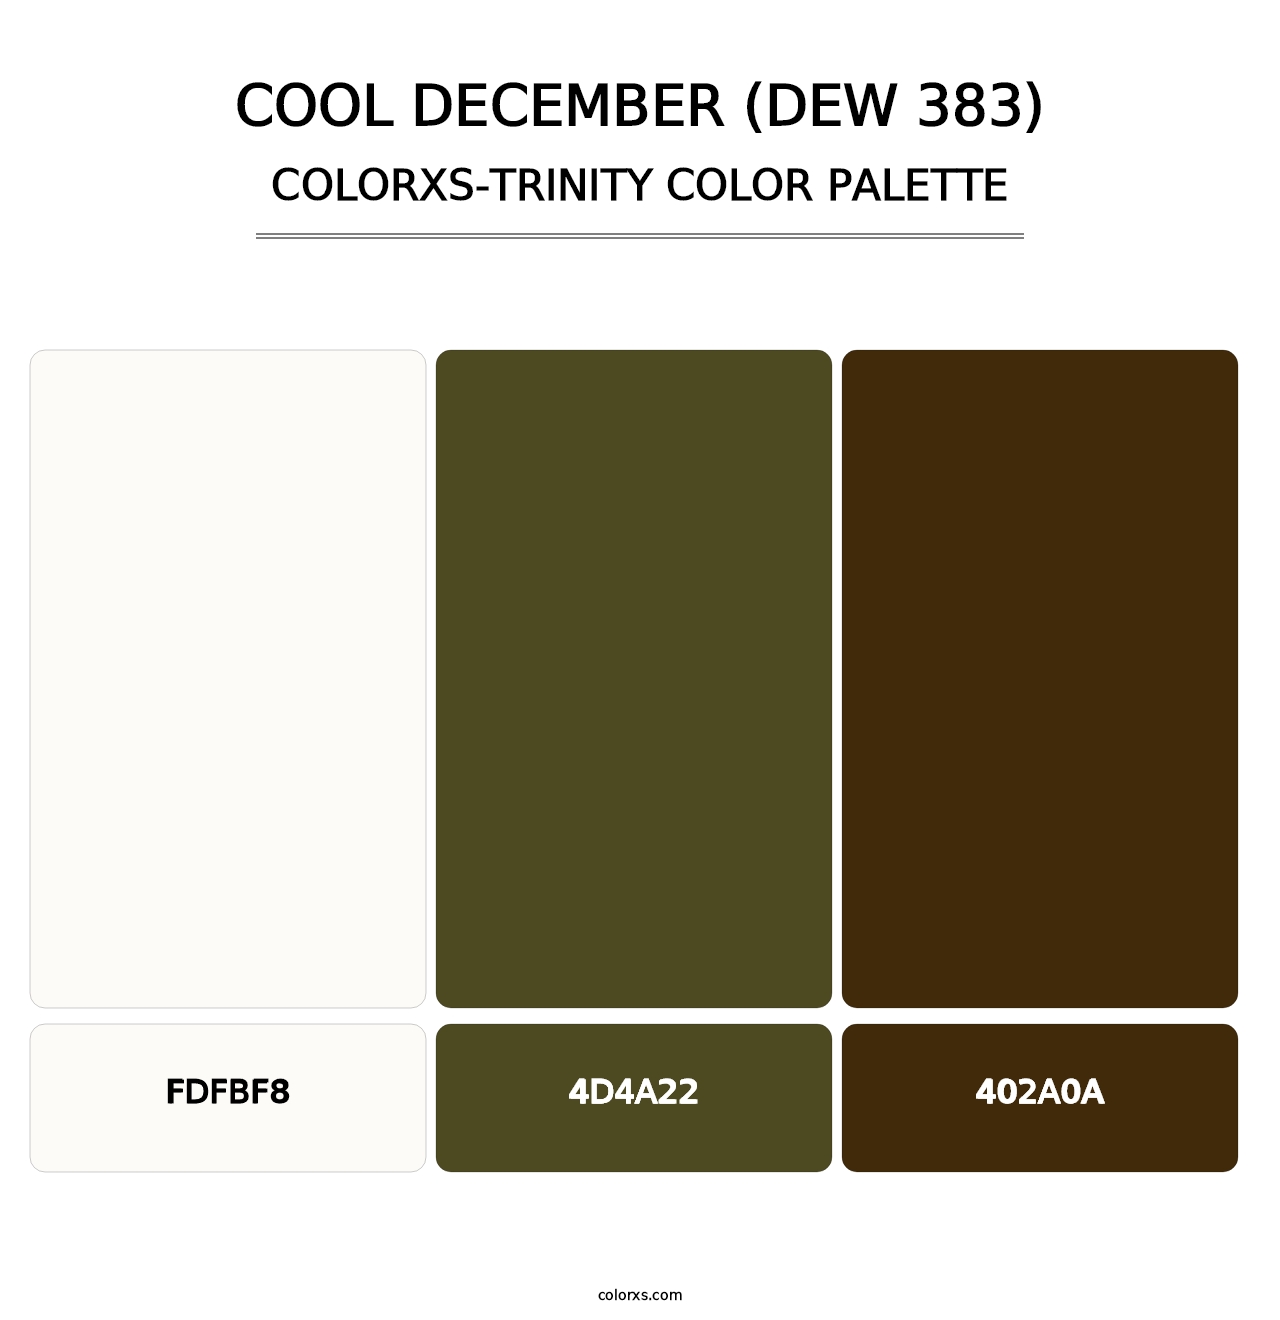 Cool December (DEW 383) - Colorxs Trinity Palette